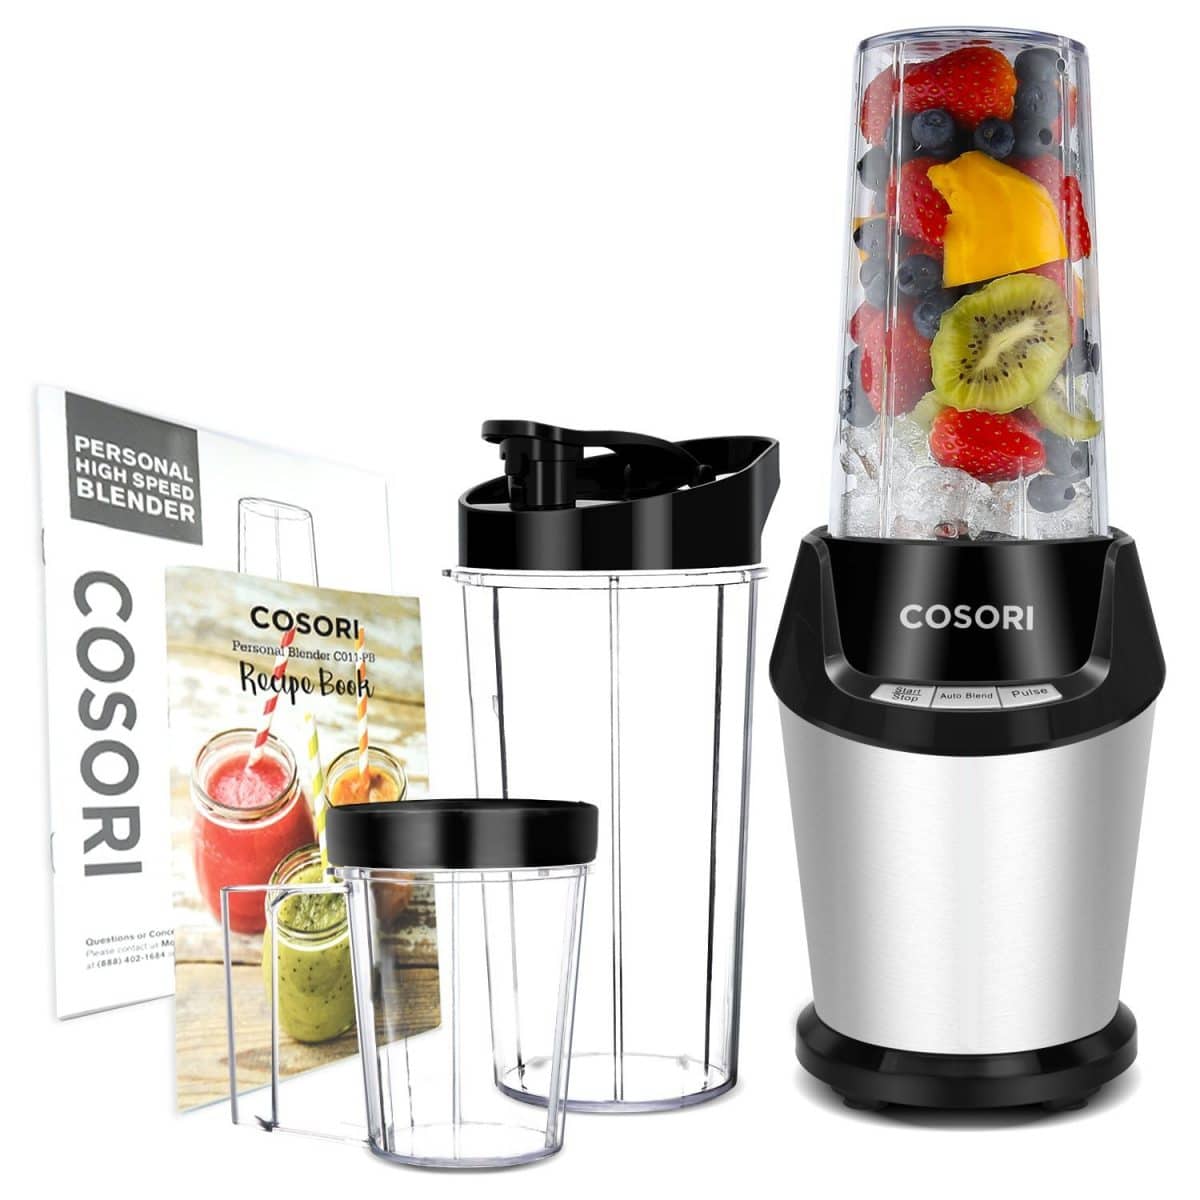 The 5 Best Personal Blenders For Smoothies to Buy in June 2022